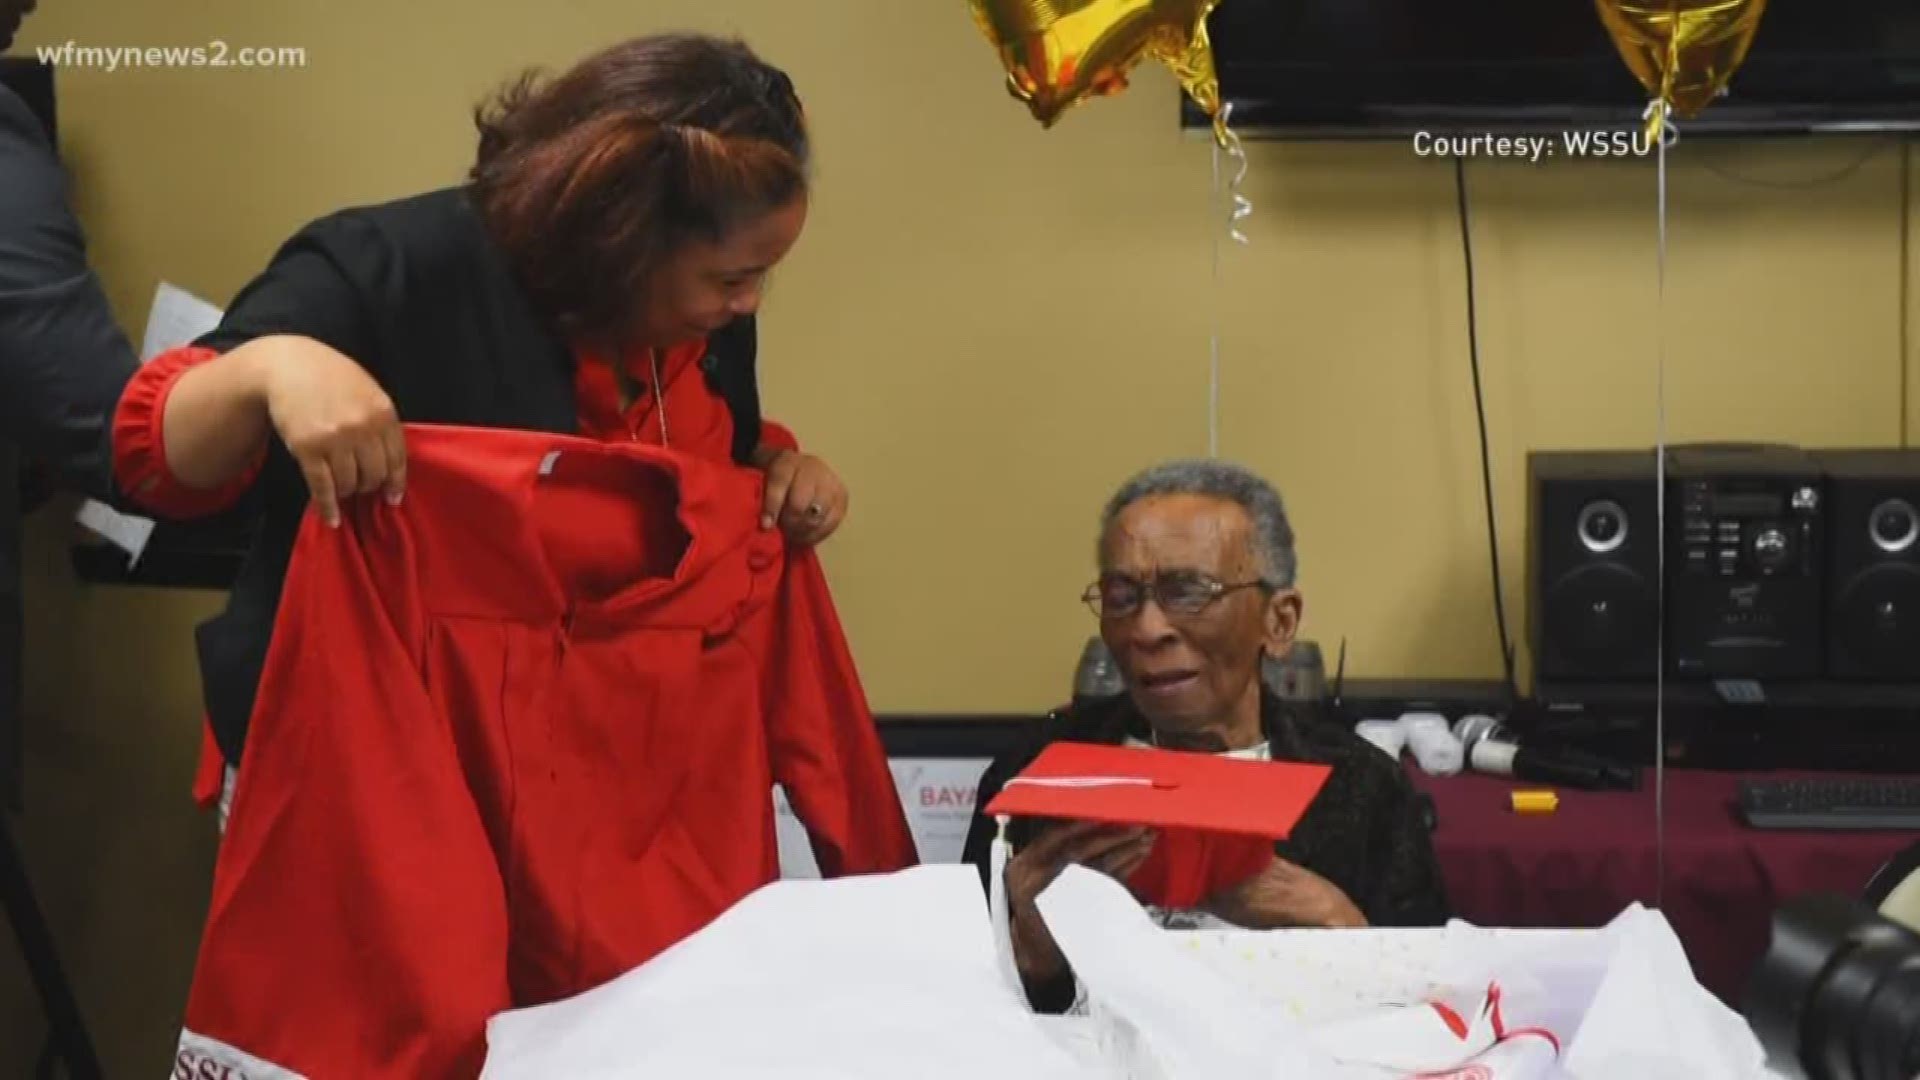 The world war two veteran says she's excited to finally get the opportunity the receive her degree at her alma mater's graduation ceremony.